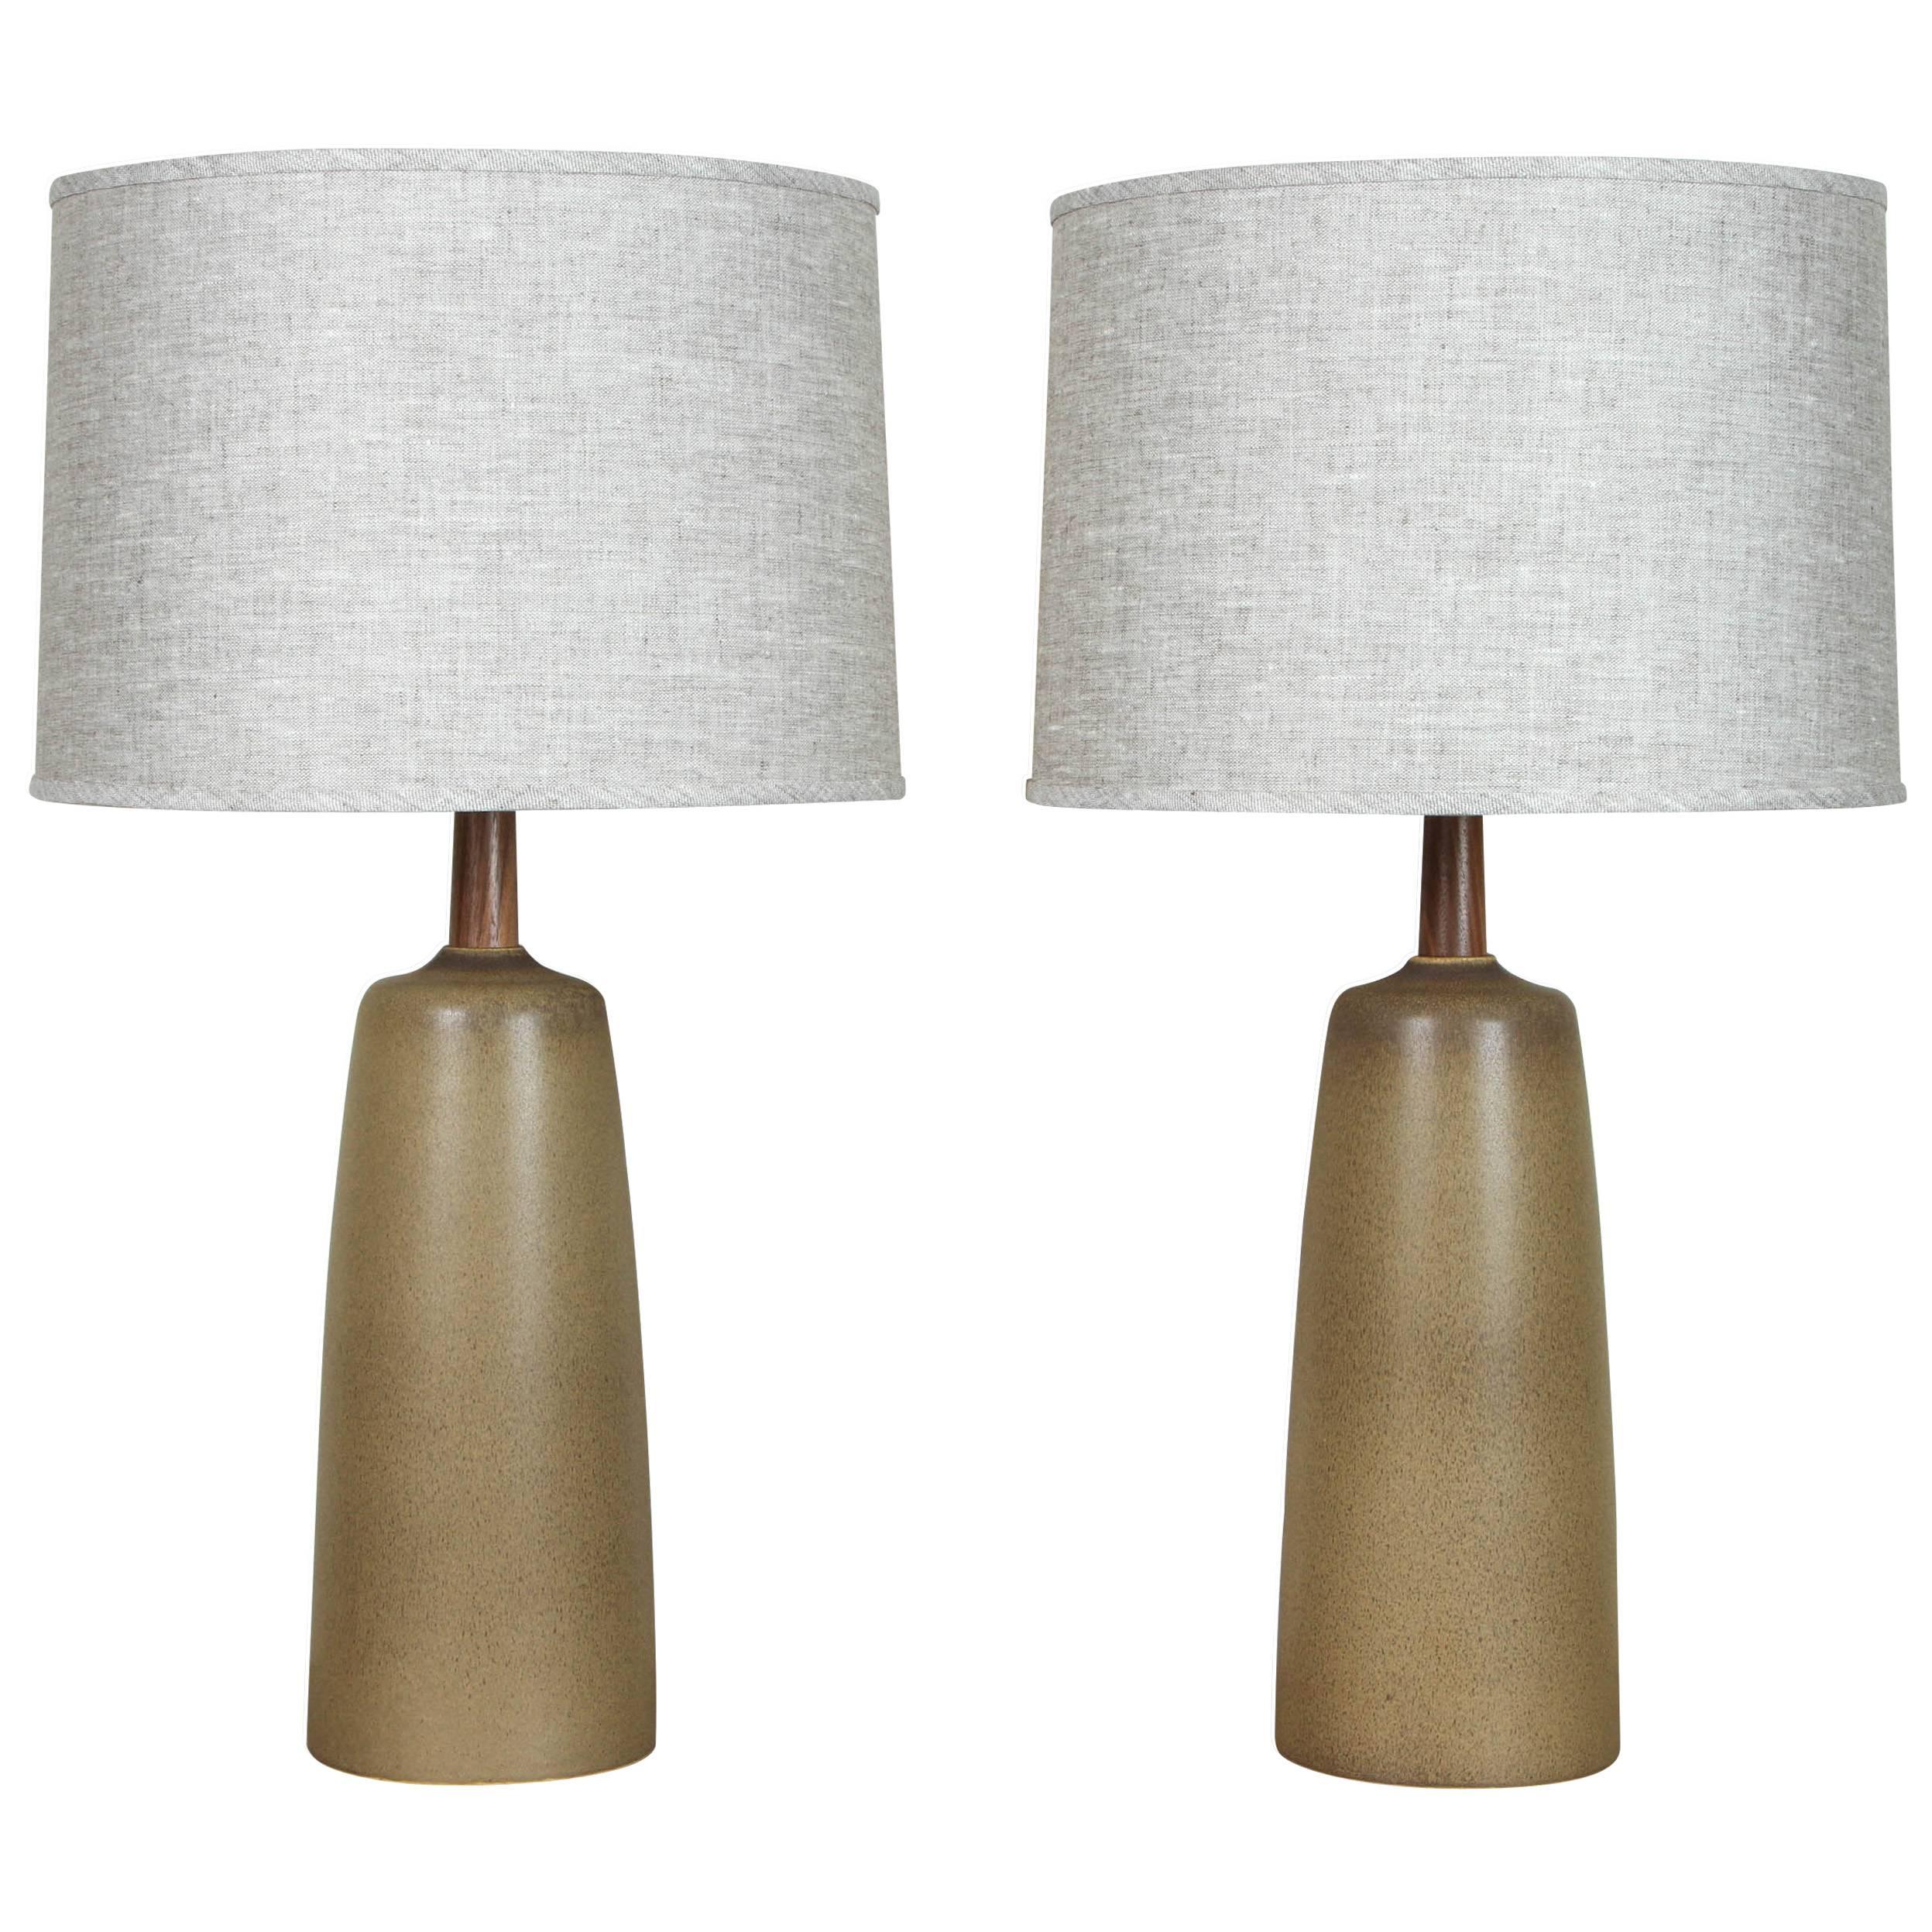 Pair of Tor Lamps by Stone and Sawyer for Lawson-Fenning